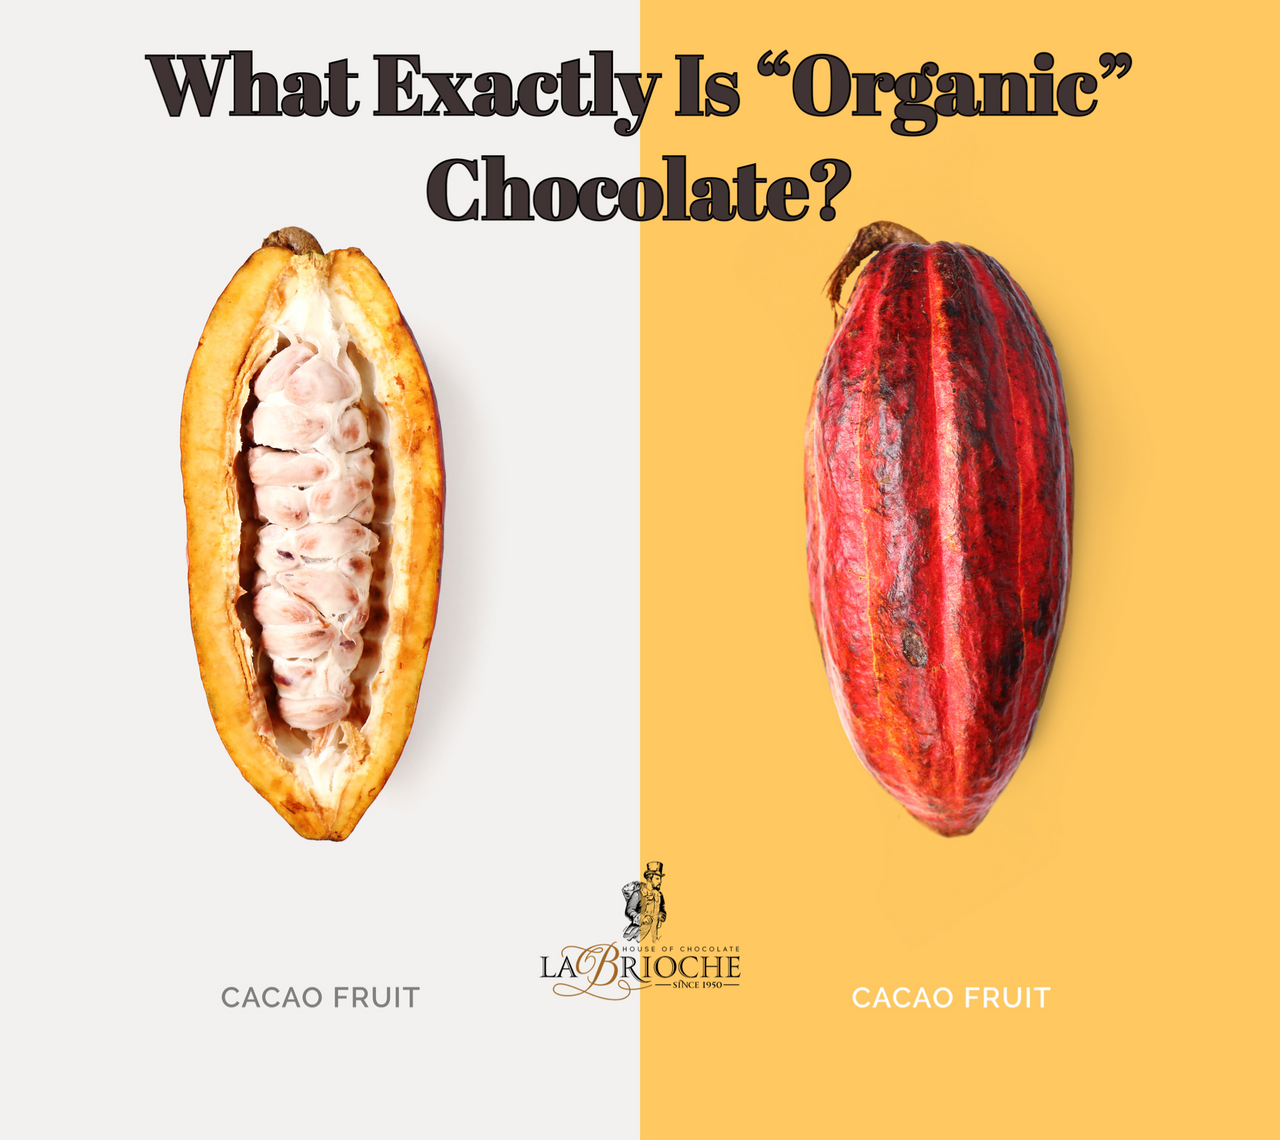 What Exactly Is “Organic” Chocolate?